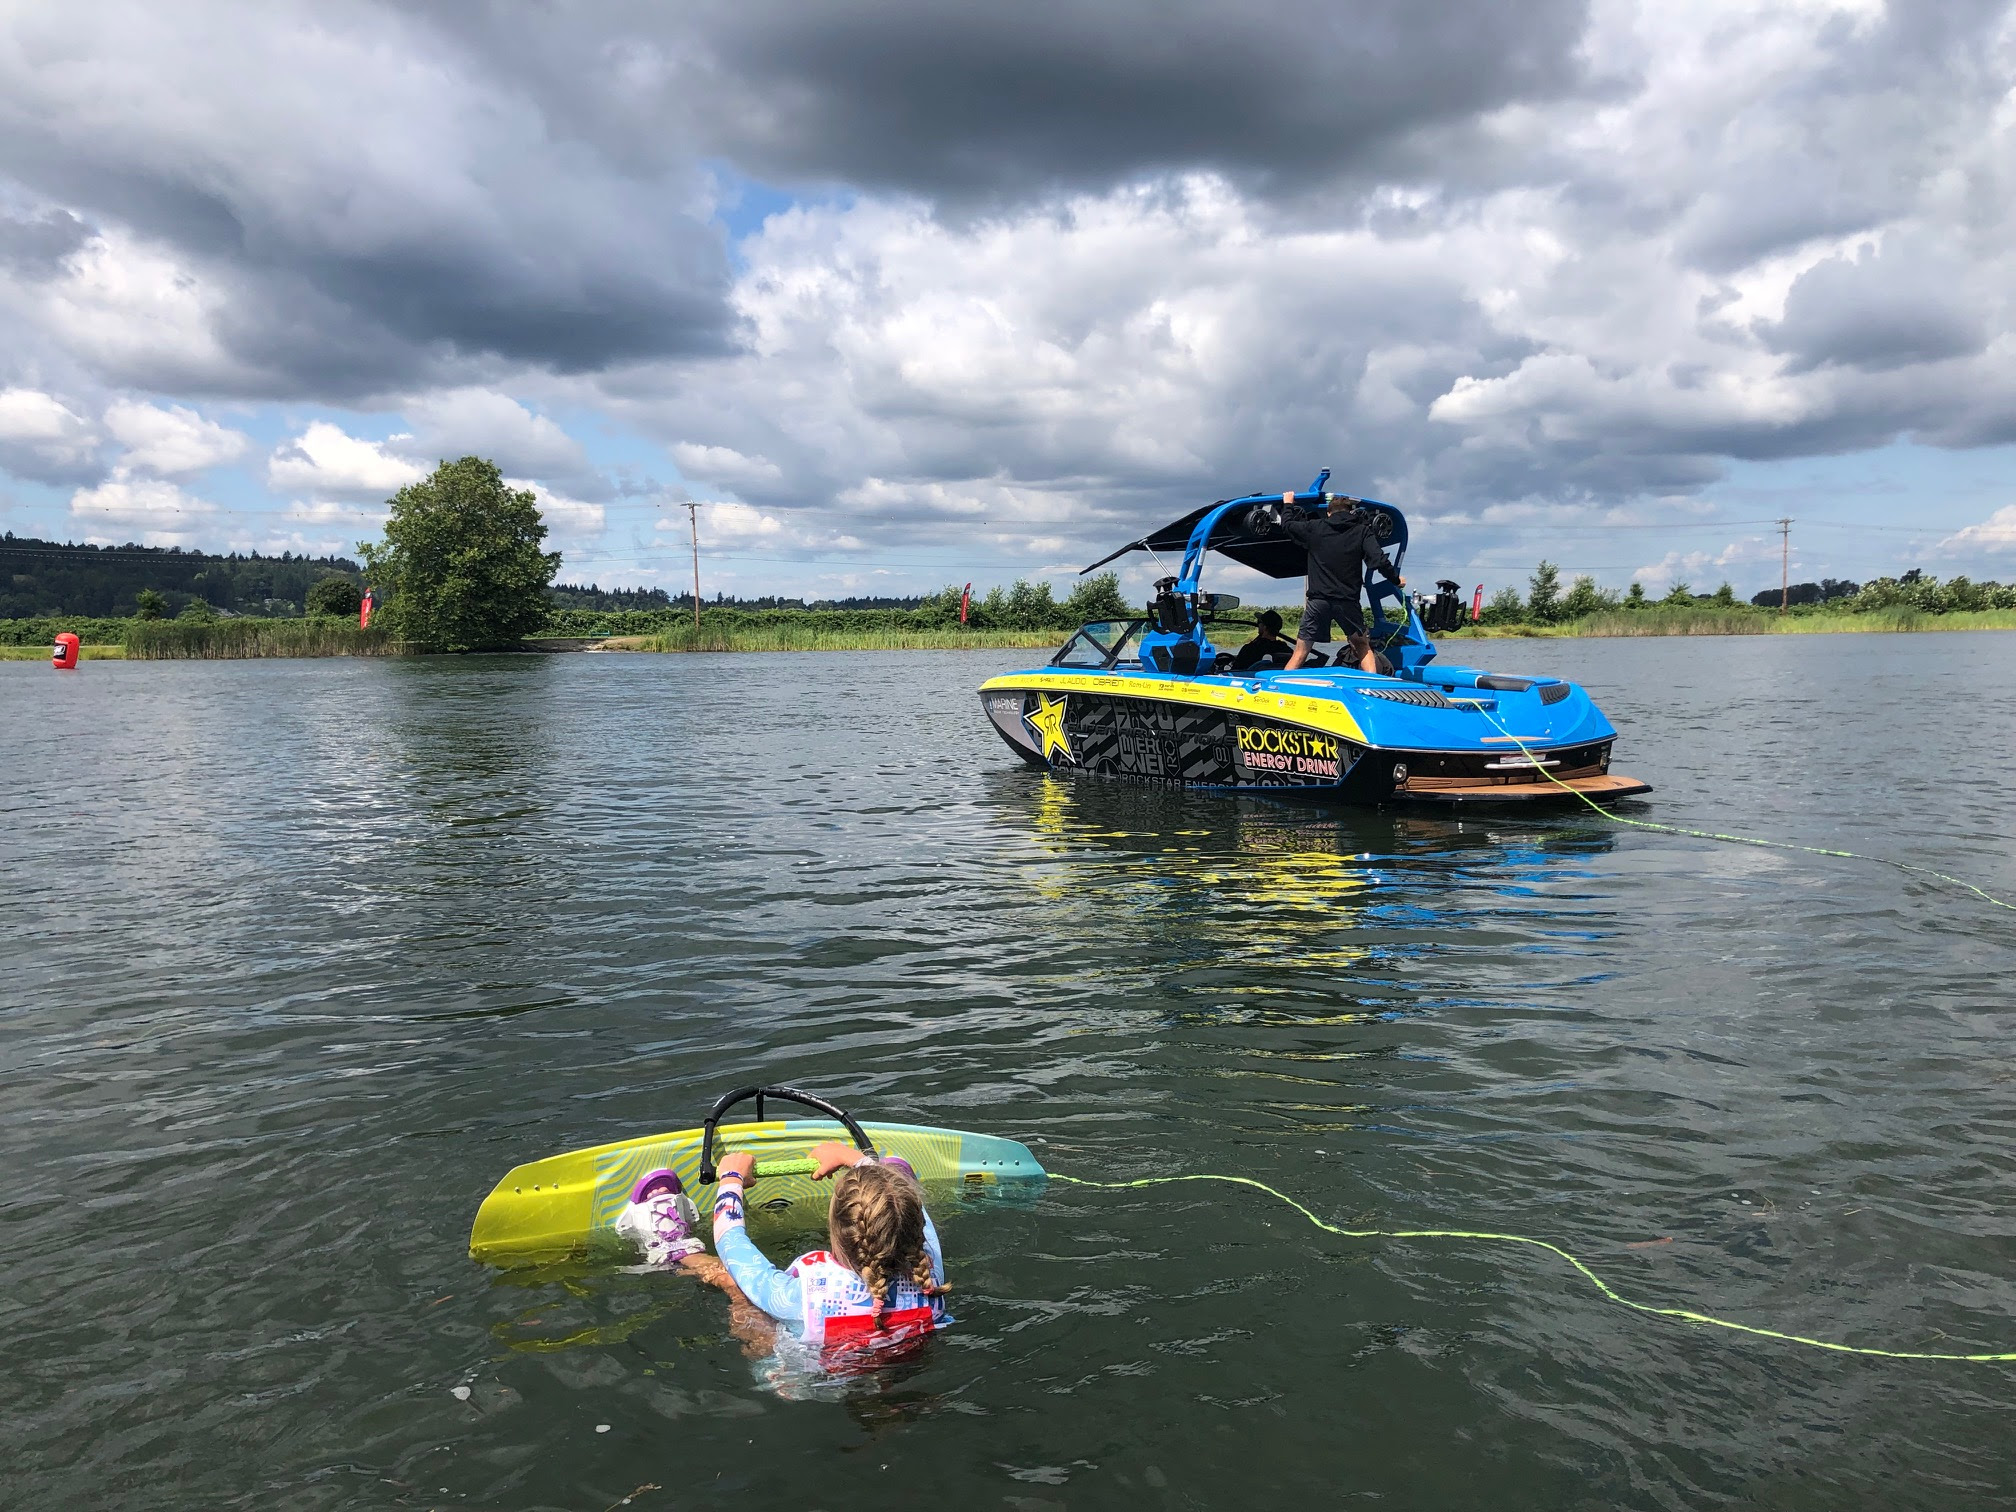 NATIONS TOP AMATEURS THROW DOWN ON DAY ONE OF THE 2019 NAUTIQUE WWA WAKEBOARD NATIONAL CHAMPIONSHIPS PRESENTED BY ROCKSTAR ENERGY! ???? hq pic